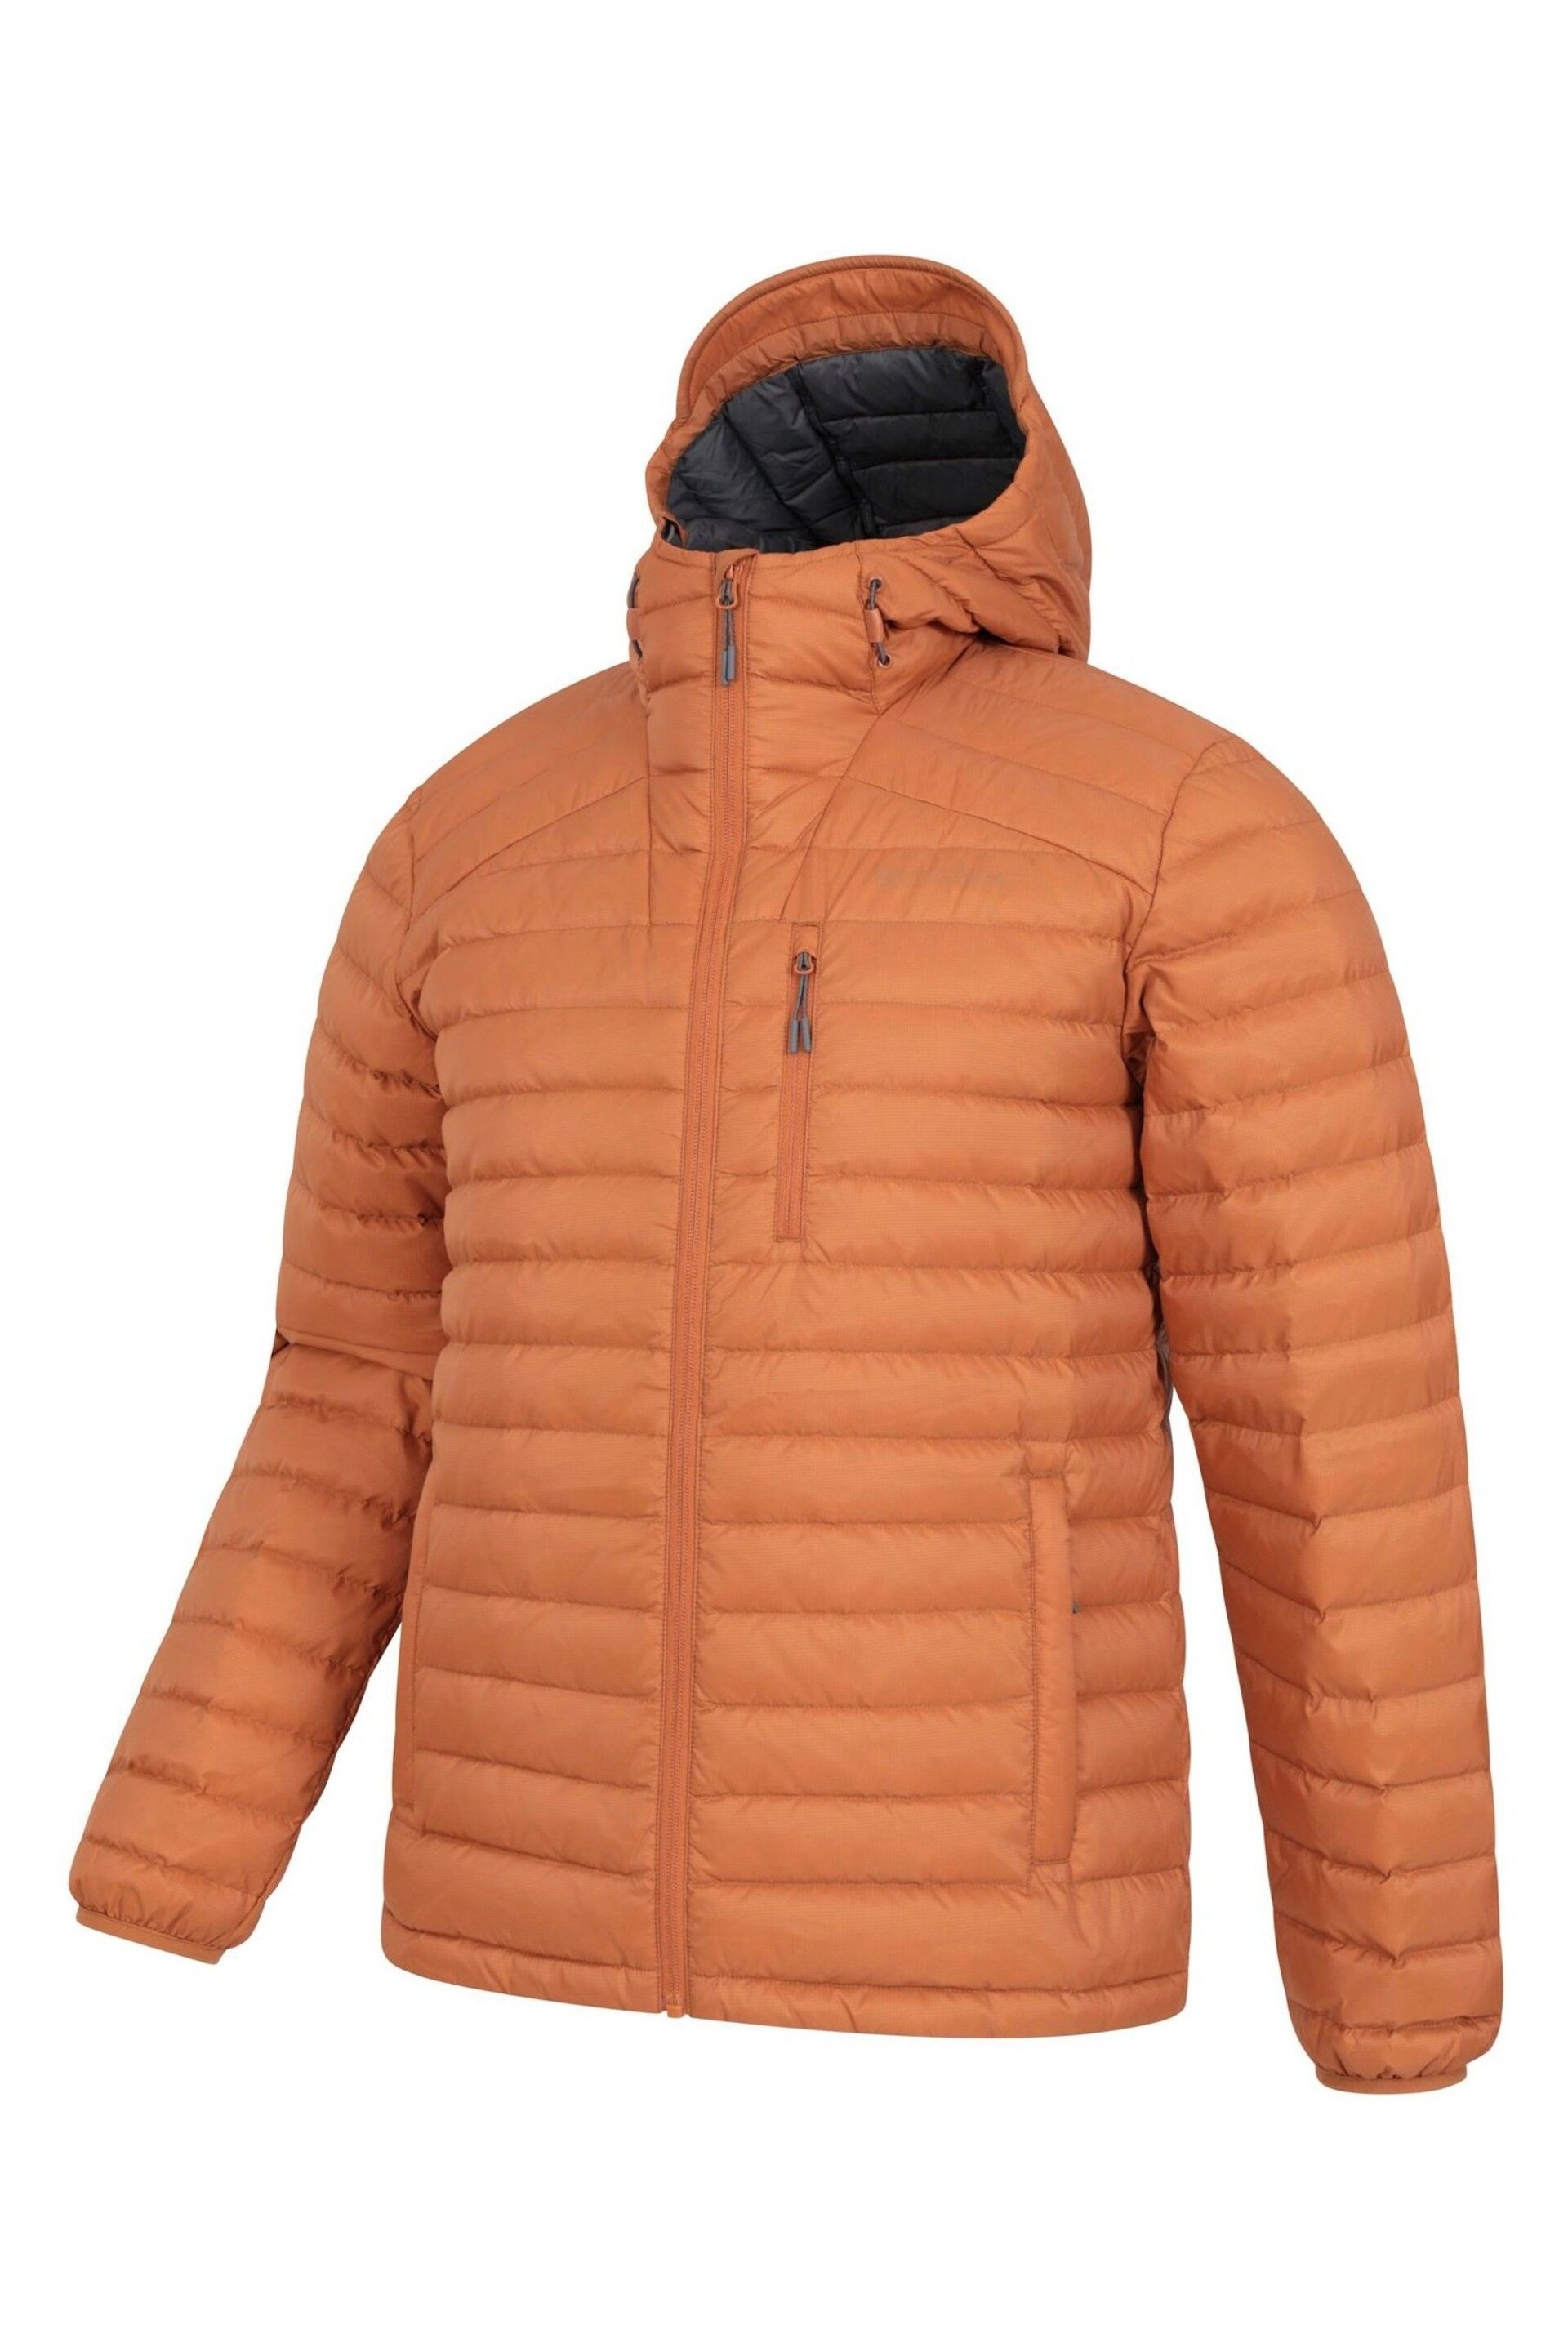 Mountain Warehouse Orange Mens Henry II Extreme Water Resistant Down Padded Jacket - Image 5 of 6